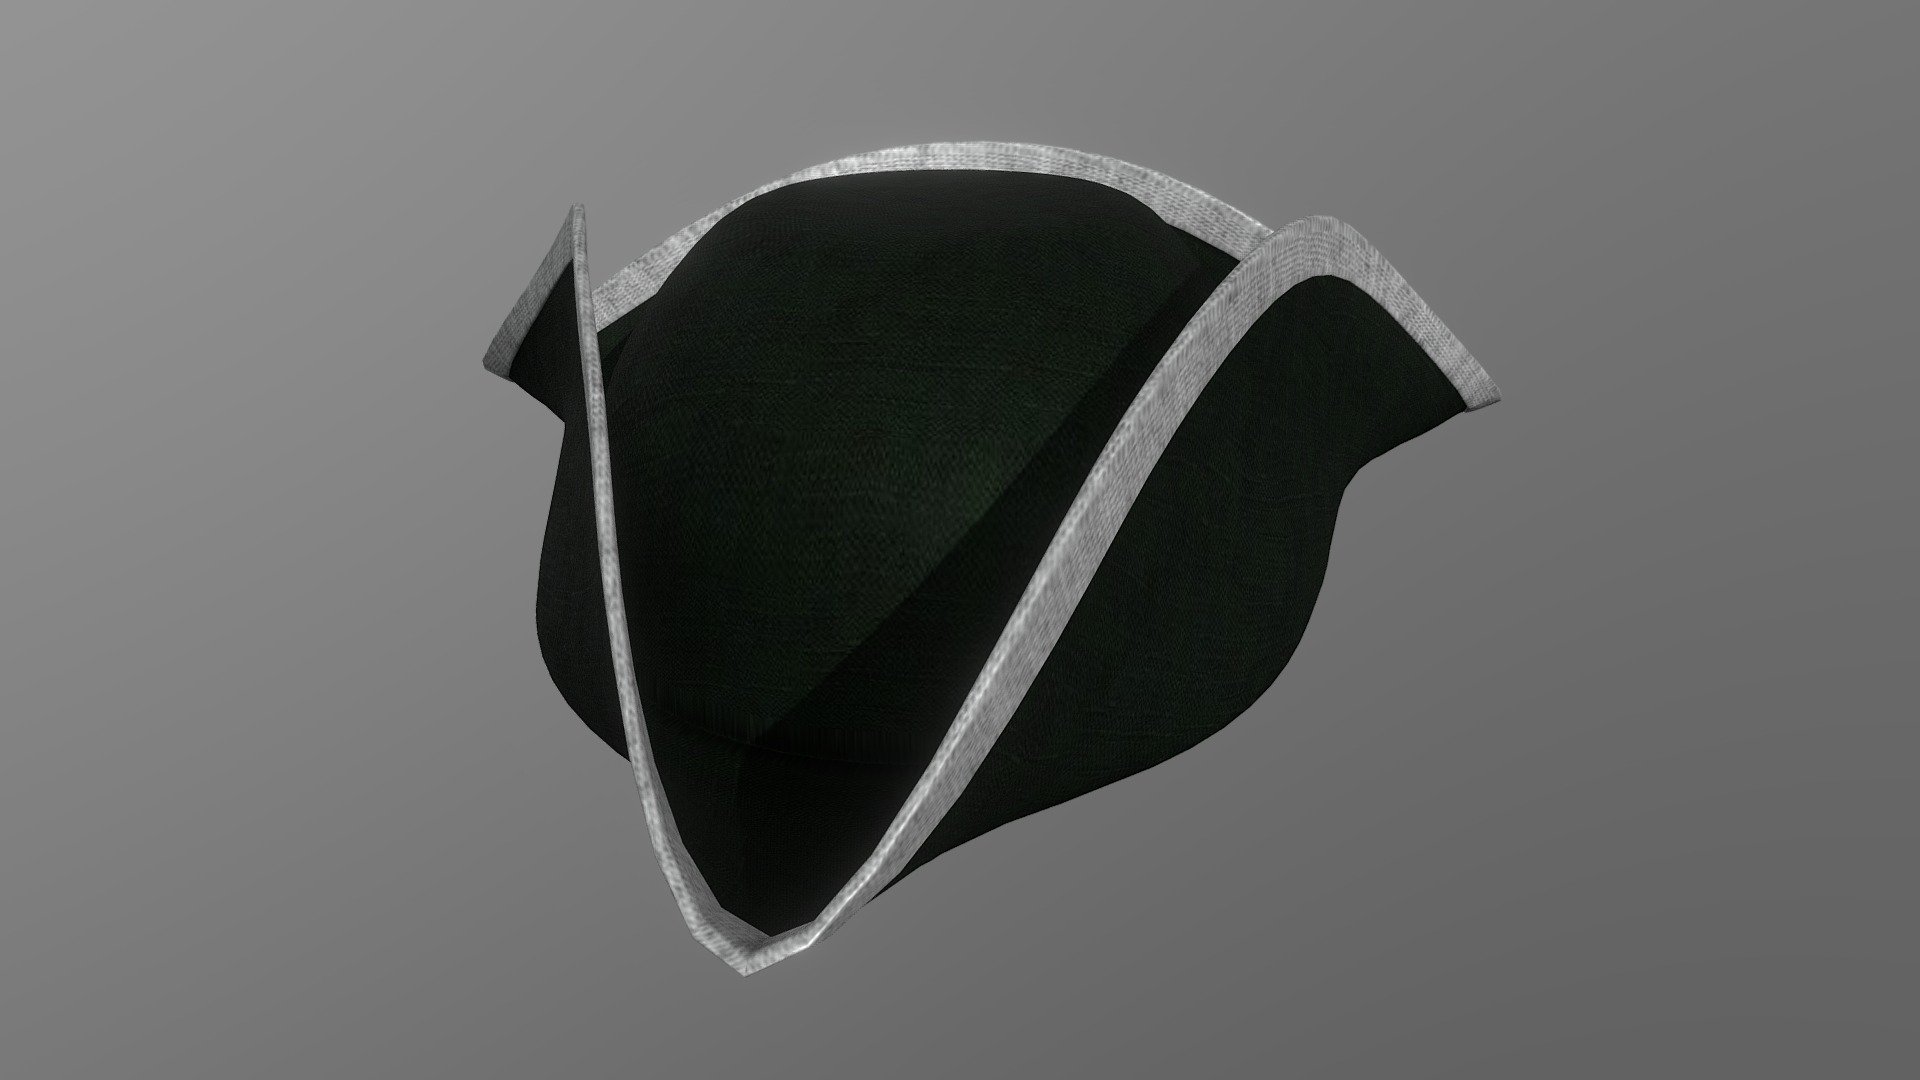 Tricorne Hat 1 (Green)
Bring your 3D model of a Tricorne Hat 1 to life with this low-poly design. Perfect for use in games, animations, VR, AR, and more, this model is optimized for performance and still retains a high level of detail.


Features



Low poly design with 8,210 vertices

16,272 edges

8,064 faces (polygons)

16,128 tris

2k PBR Textures and materials

File formats included: .obj, .fbx, .dae


Tools Used
This Tricorne Hat 1 3D model was created using Blender 3.3.1, a popular and versatile 3D creation software.


Availability
This low-poly Tricorne Hat 1 3D model is ready for use and available for purchase. Bring your project to the next level with this high-quality and optimized model 3d model